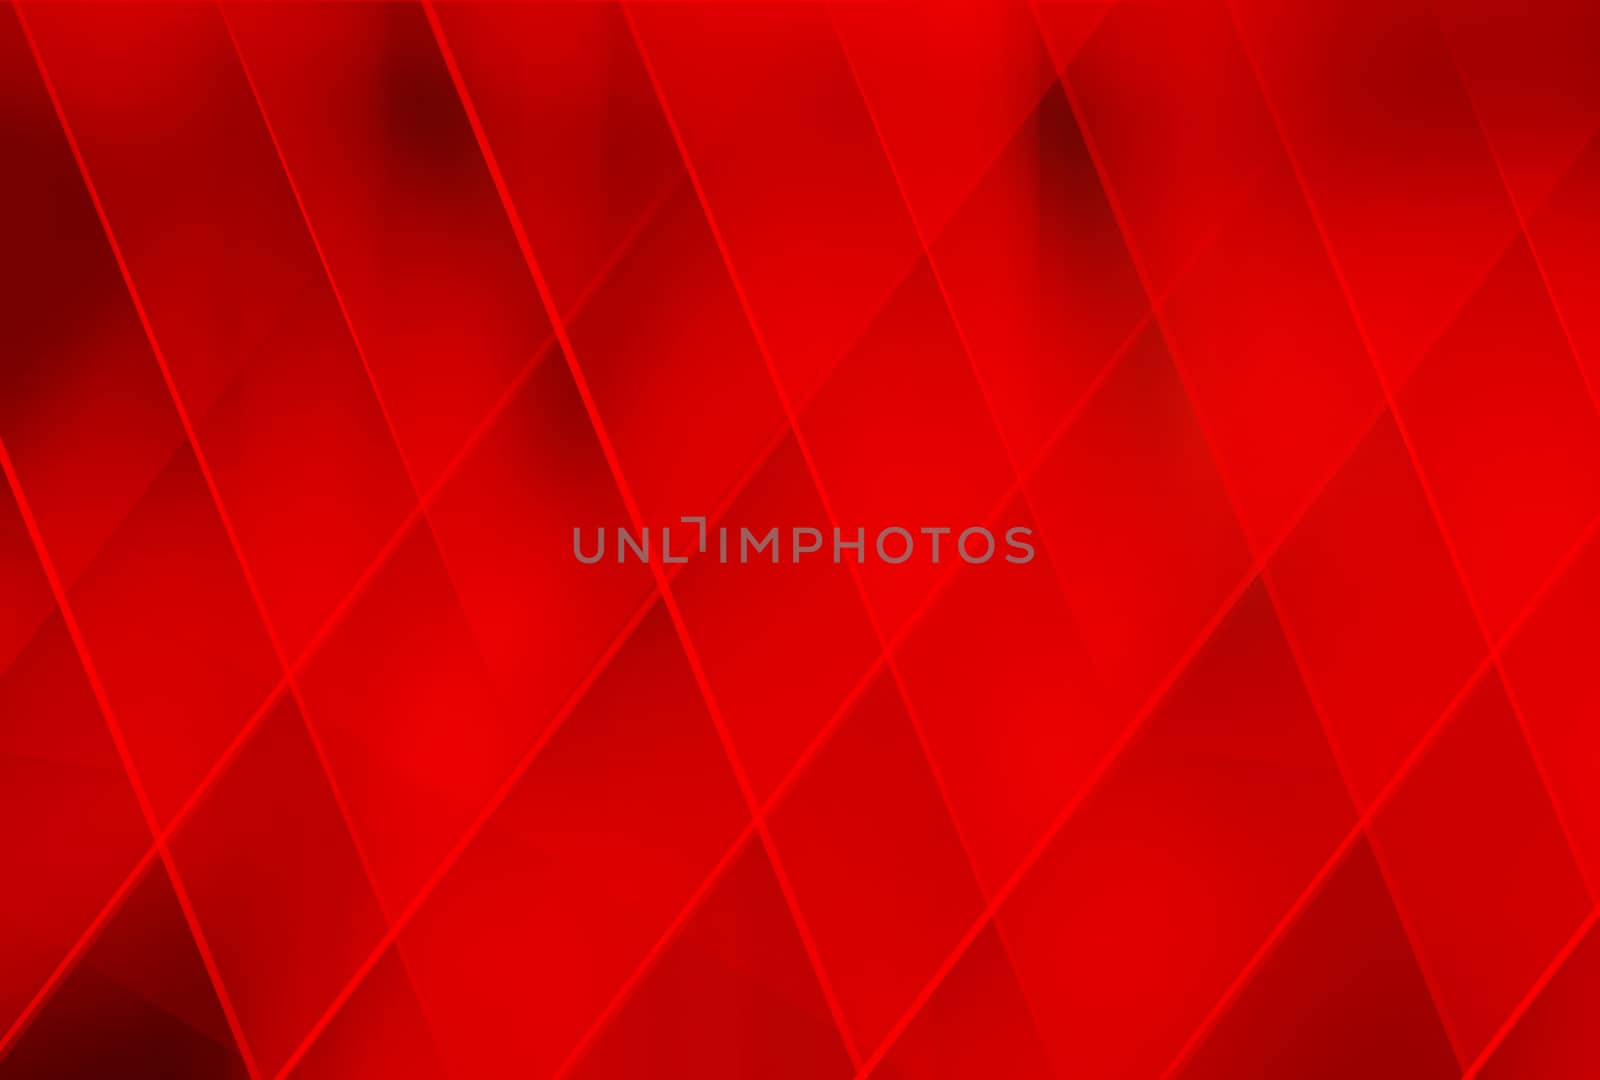 Abstract red theme background, multiple lozenges with different shades. 